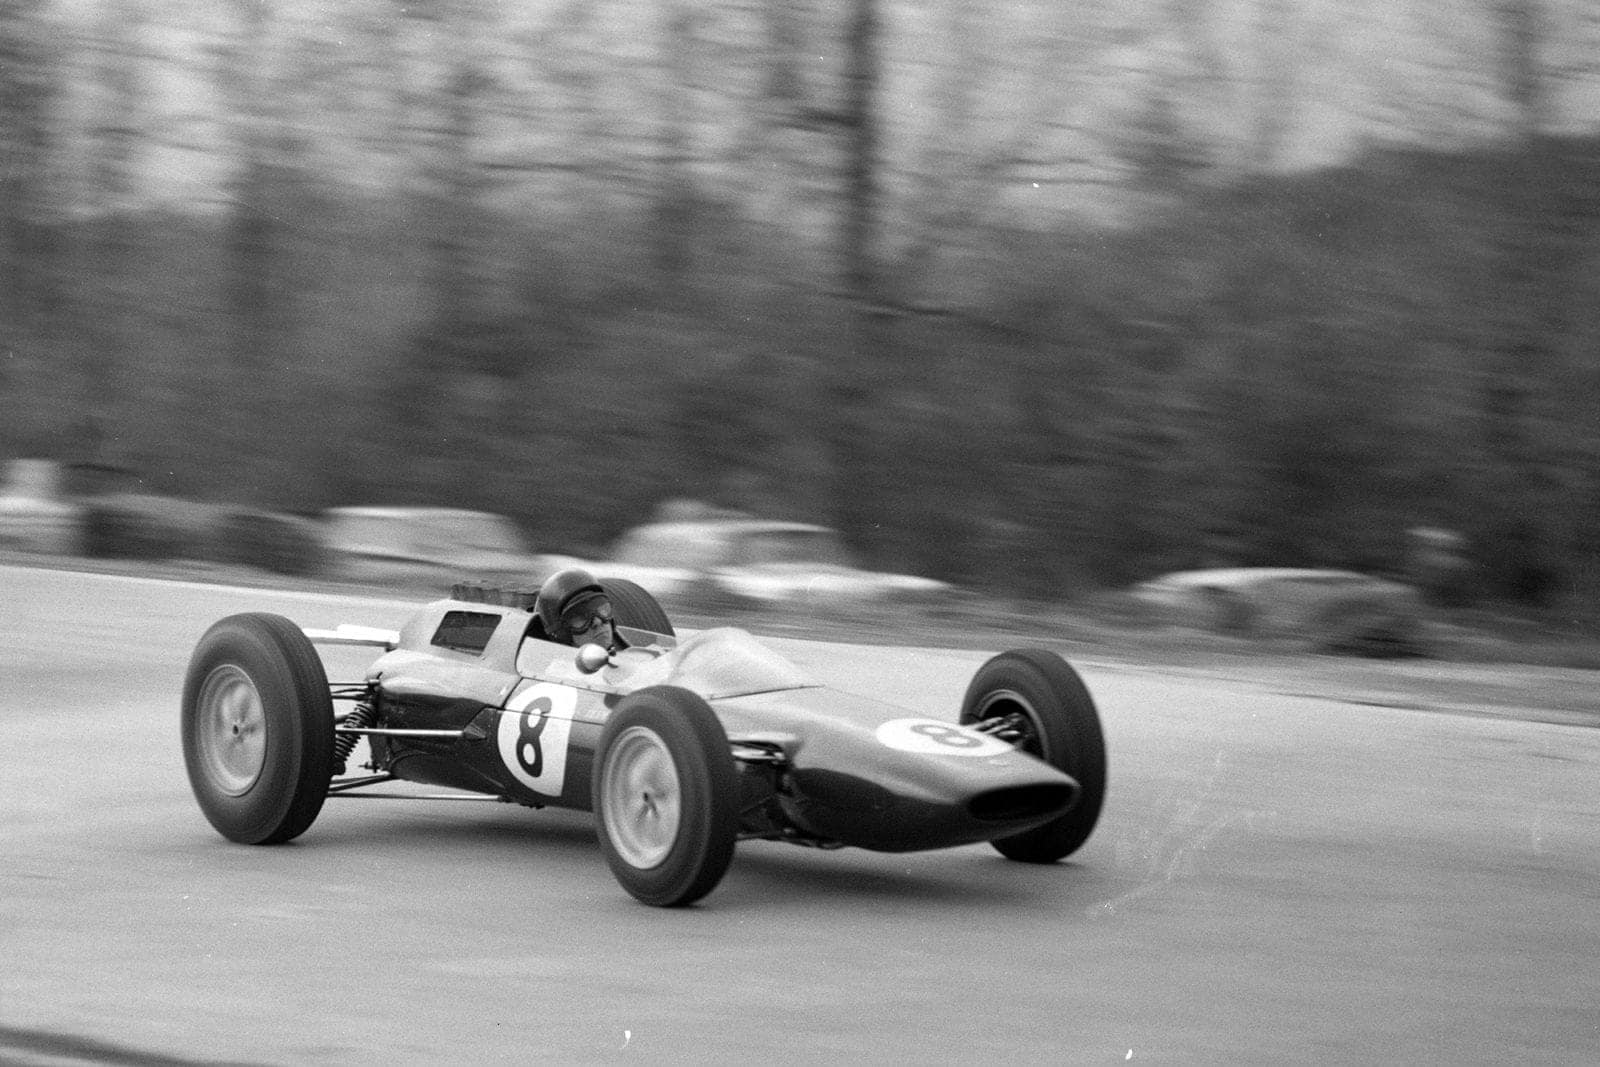 Jim Clark took his third win of the year for Lotus